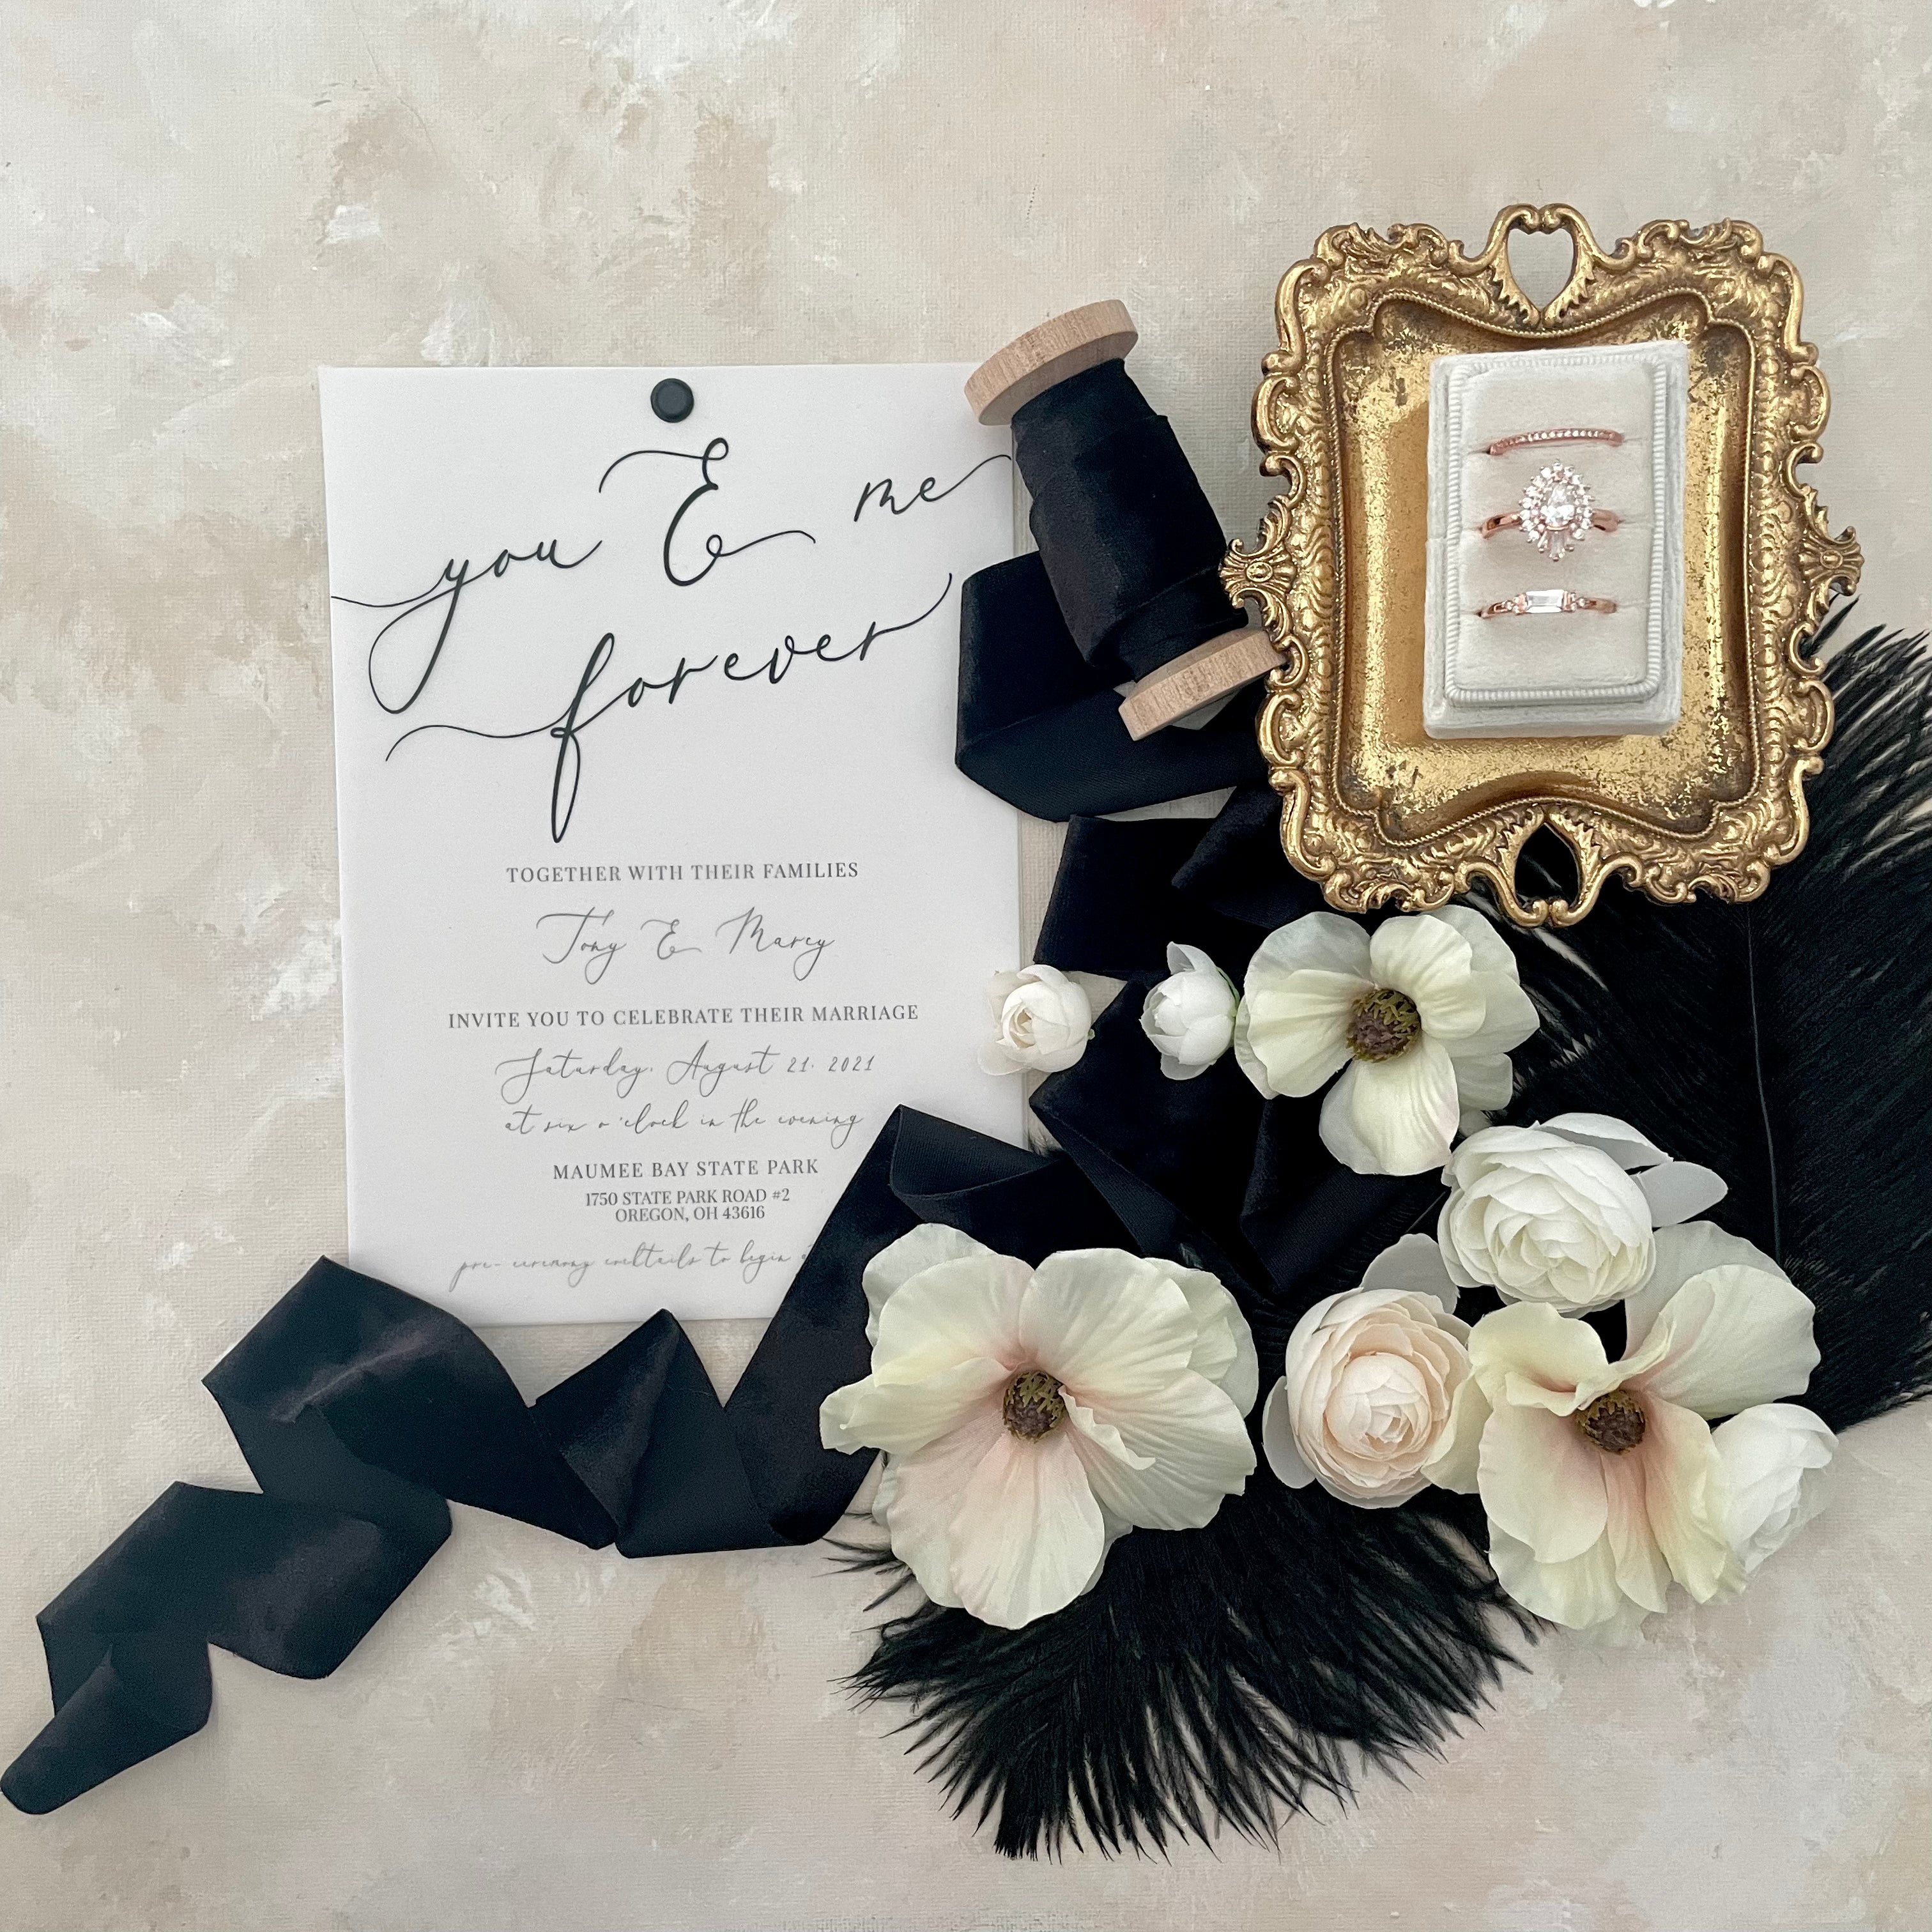 White triple slot ring box on vintage gold tray styled with wedding invitation, black modern ribbon and ivory florals  - Wedding Flat lay props from Champagne & GRIT